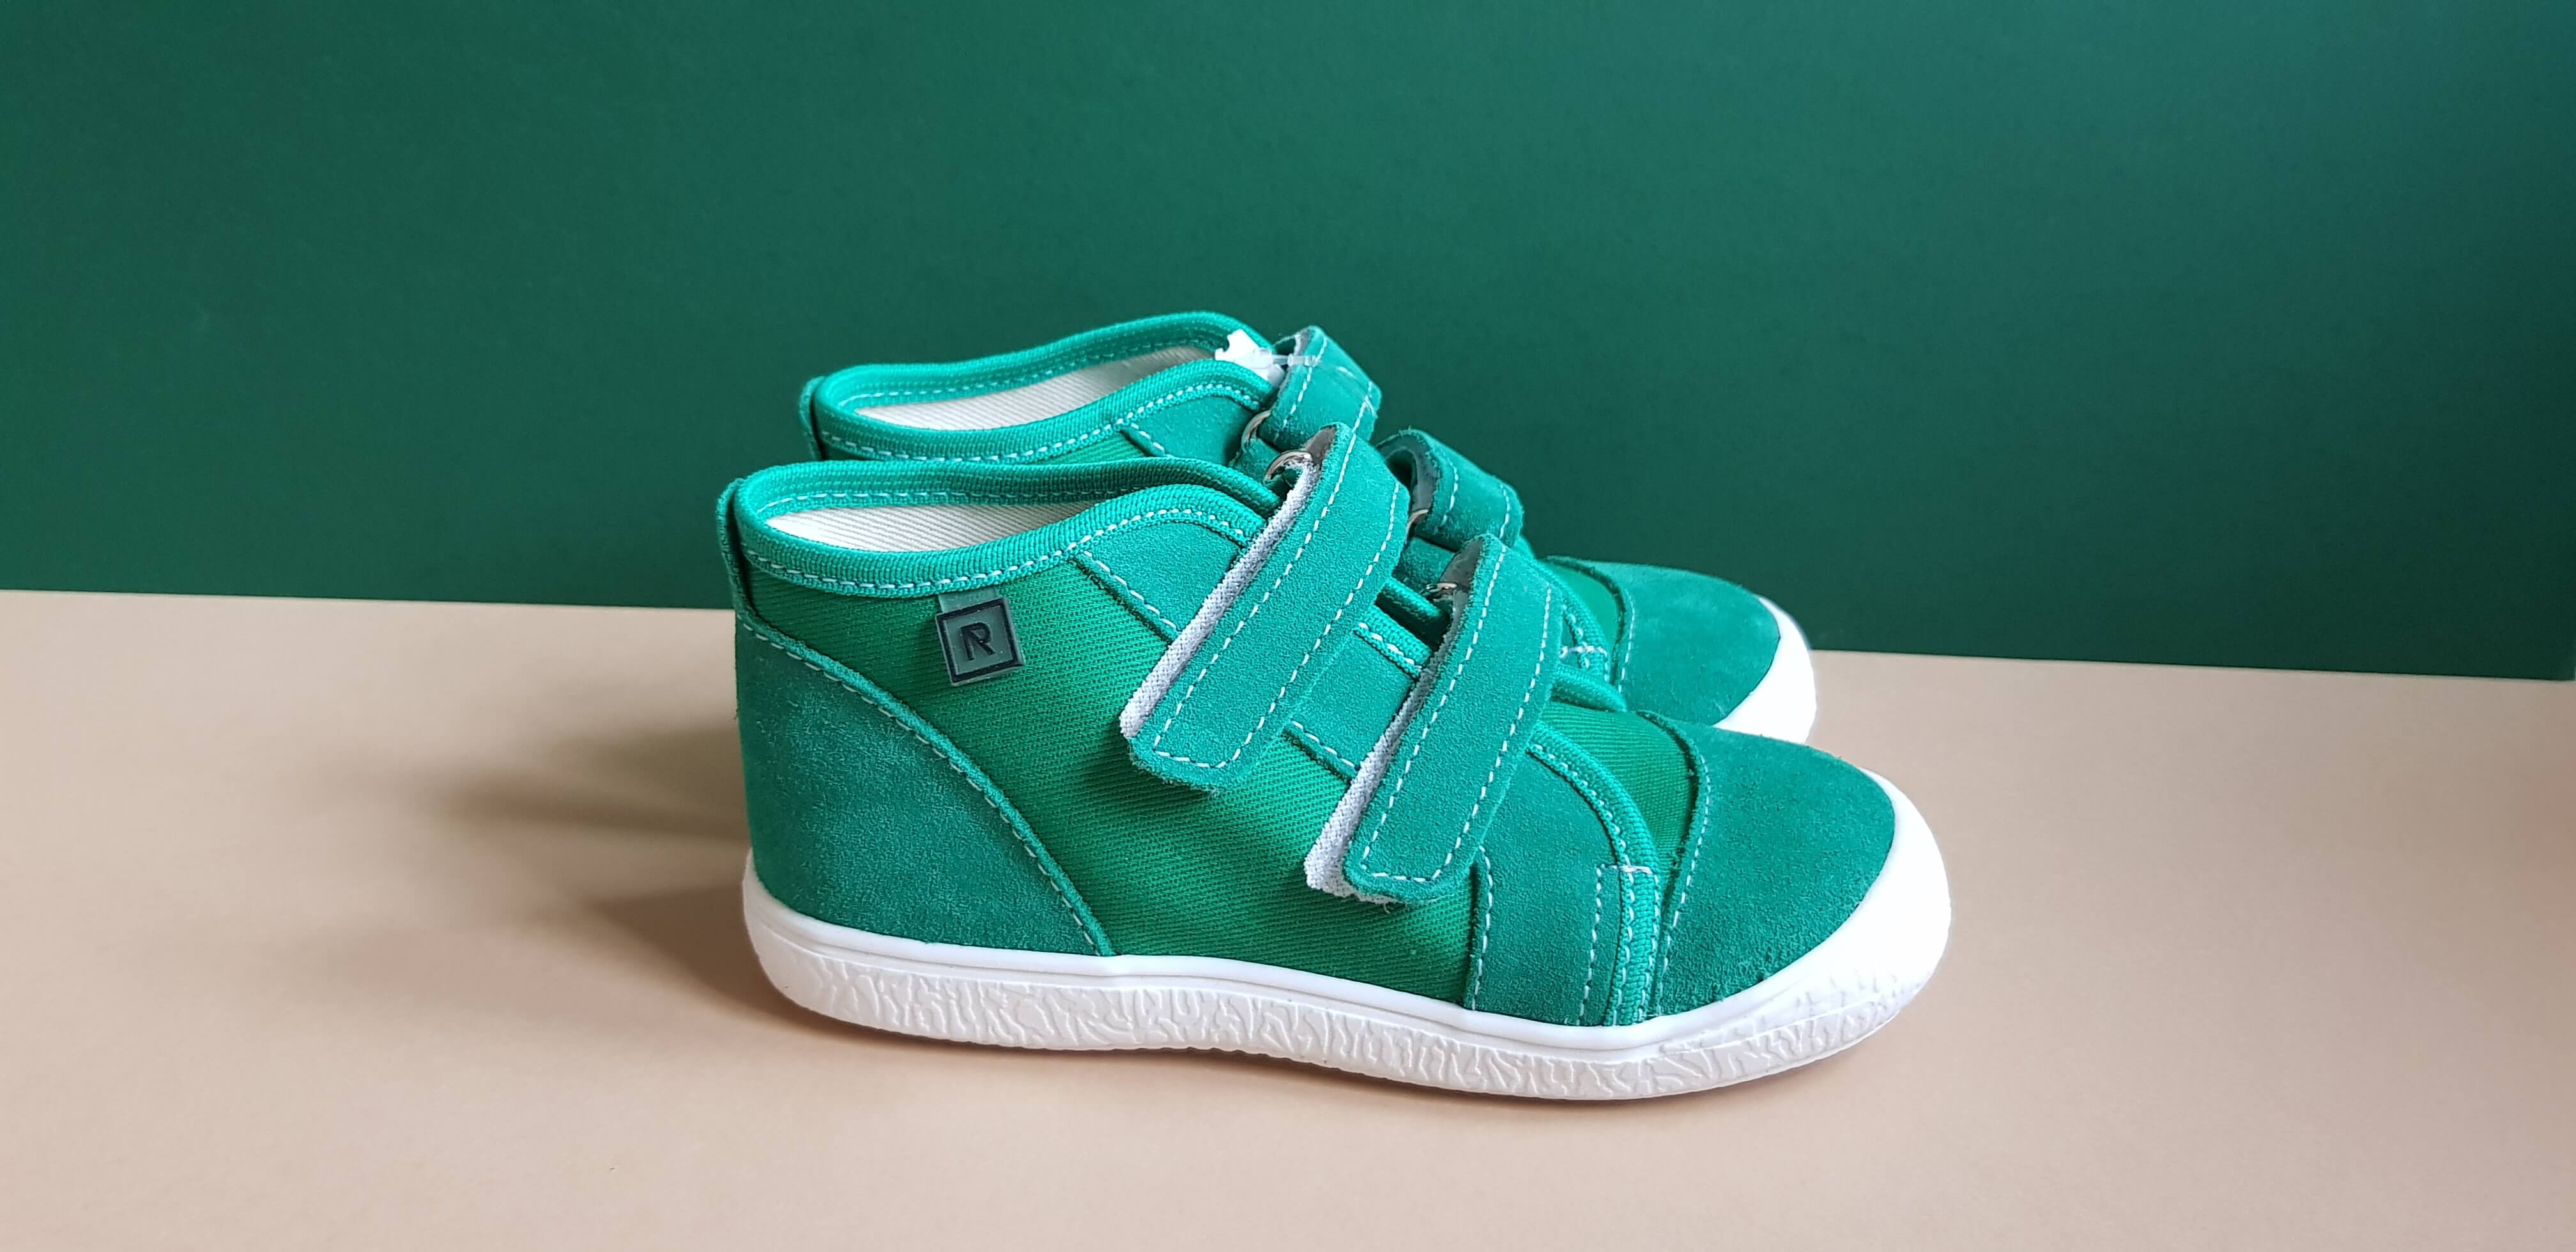 Green Handmade high-quality canvas and leather kids shoes with white sole, hook-and-loop fasteners and round toe box